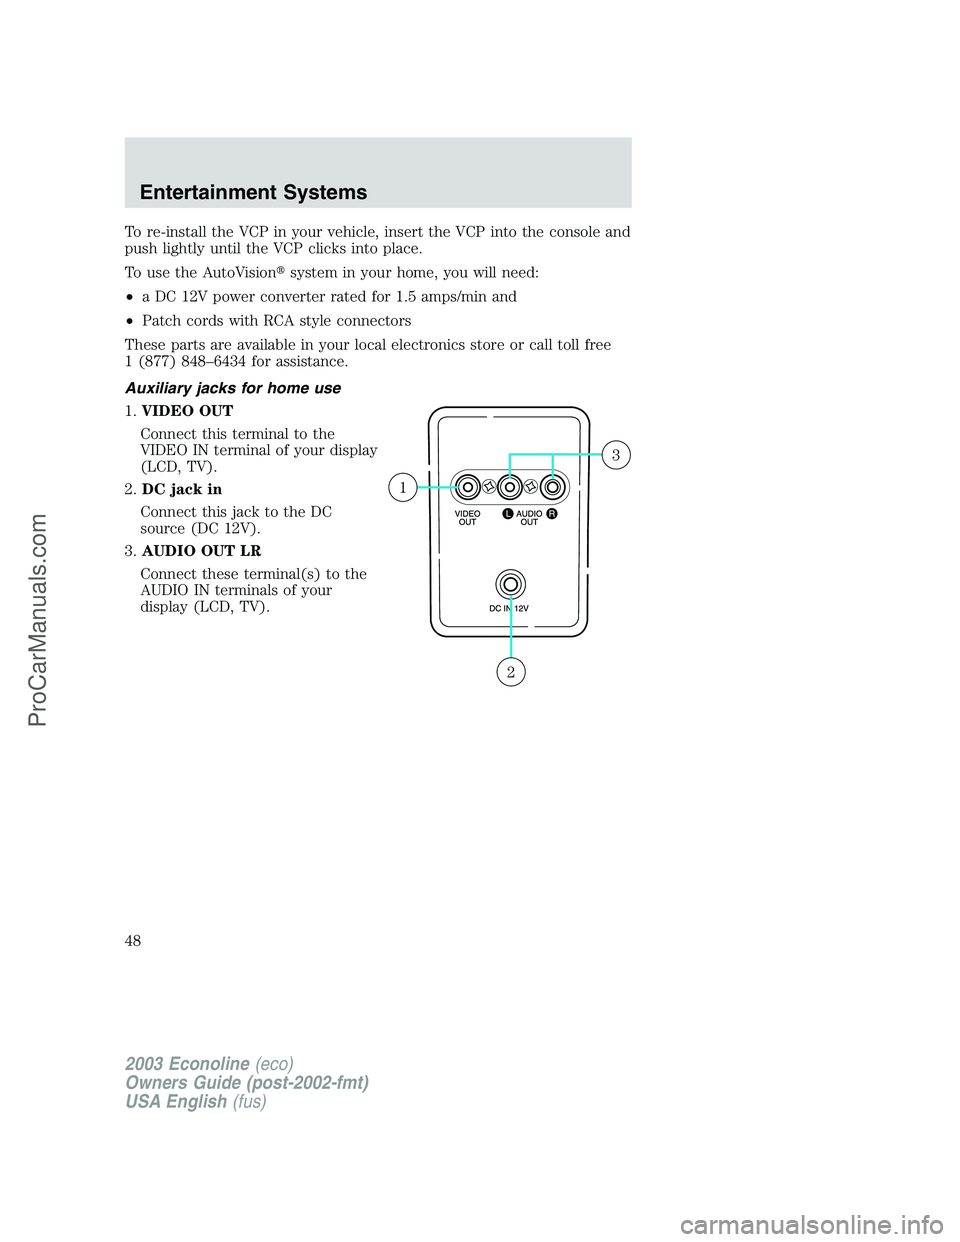 FORD E-450 2003 Service Manual To re-install the VCP in your vehicle, insert the VCP into the console and
push lightly until the VCP clicks into place.
To use the AutoVisionsystem in your home, you will need:
•a DC 12V power con